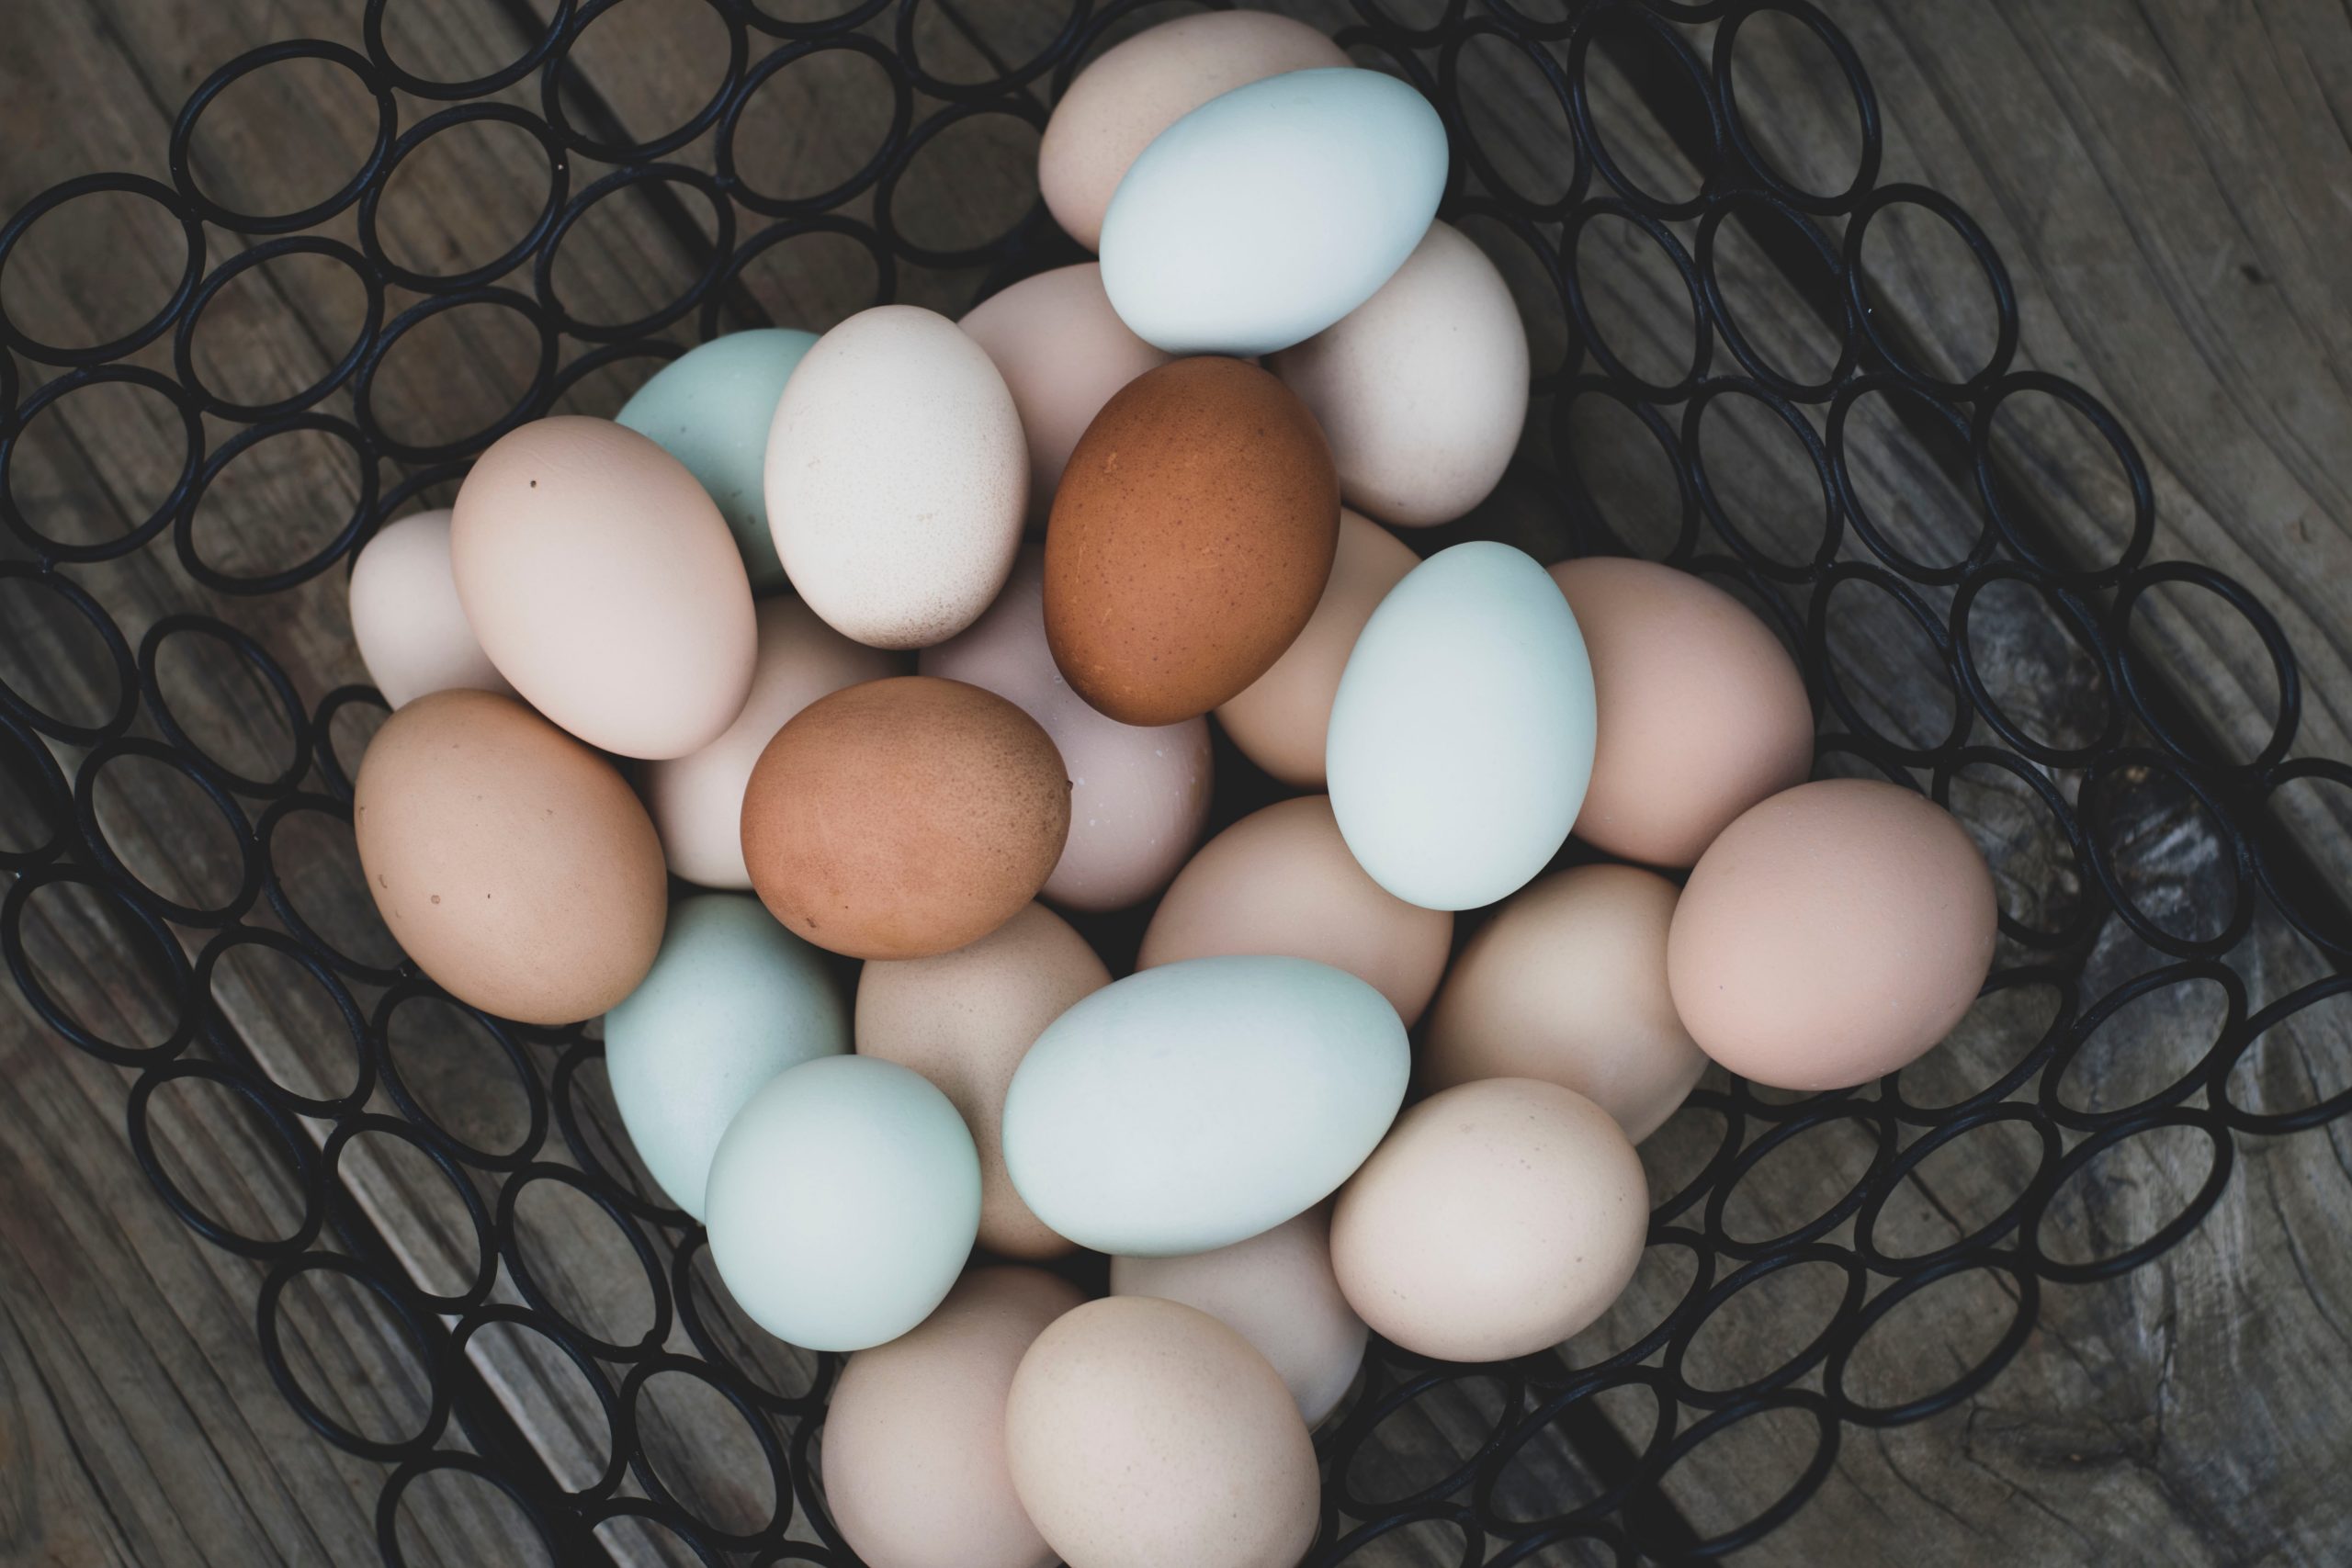 Basket of colored eggs